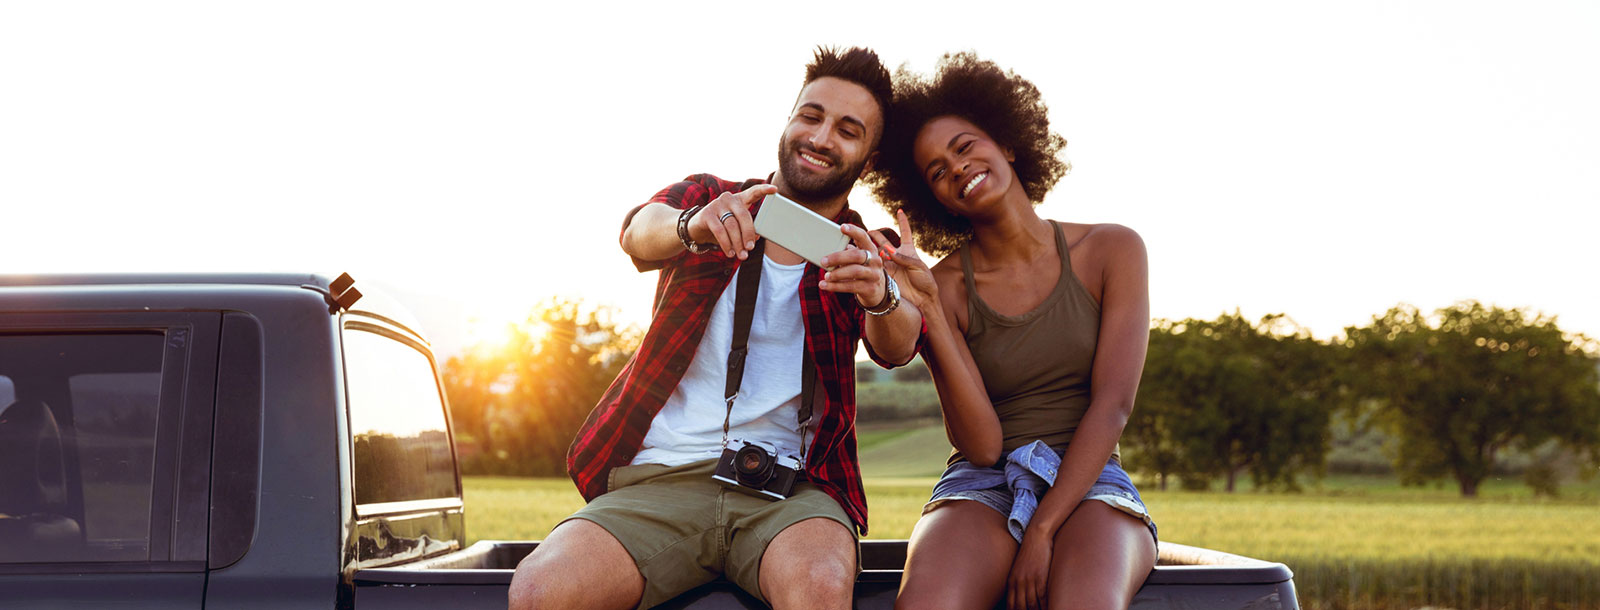 Young couple sitting on back on truck taking selfie.